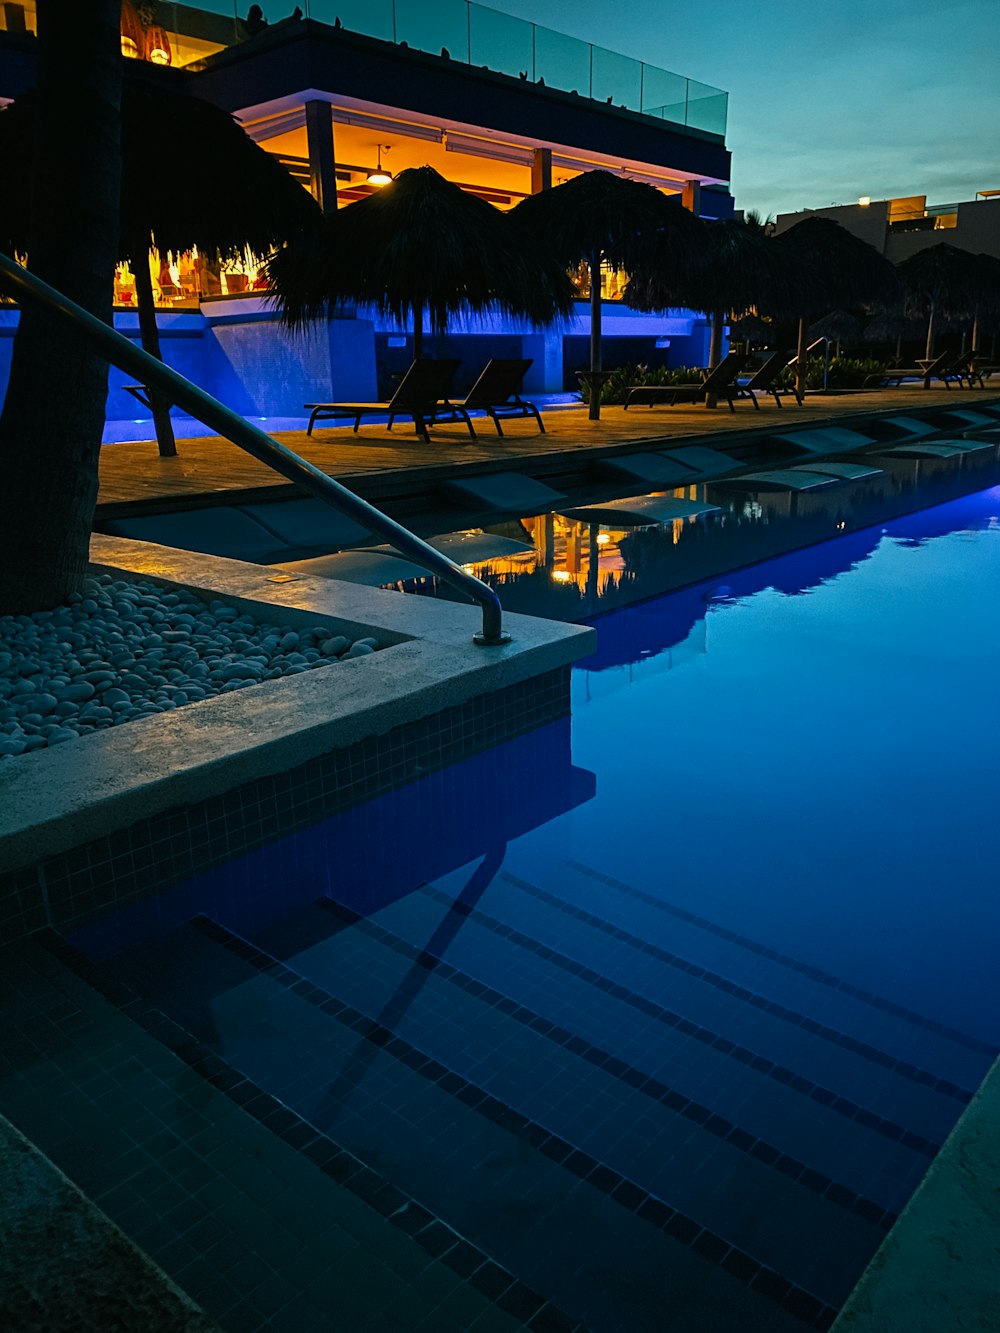 swimming pool near trees during night time